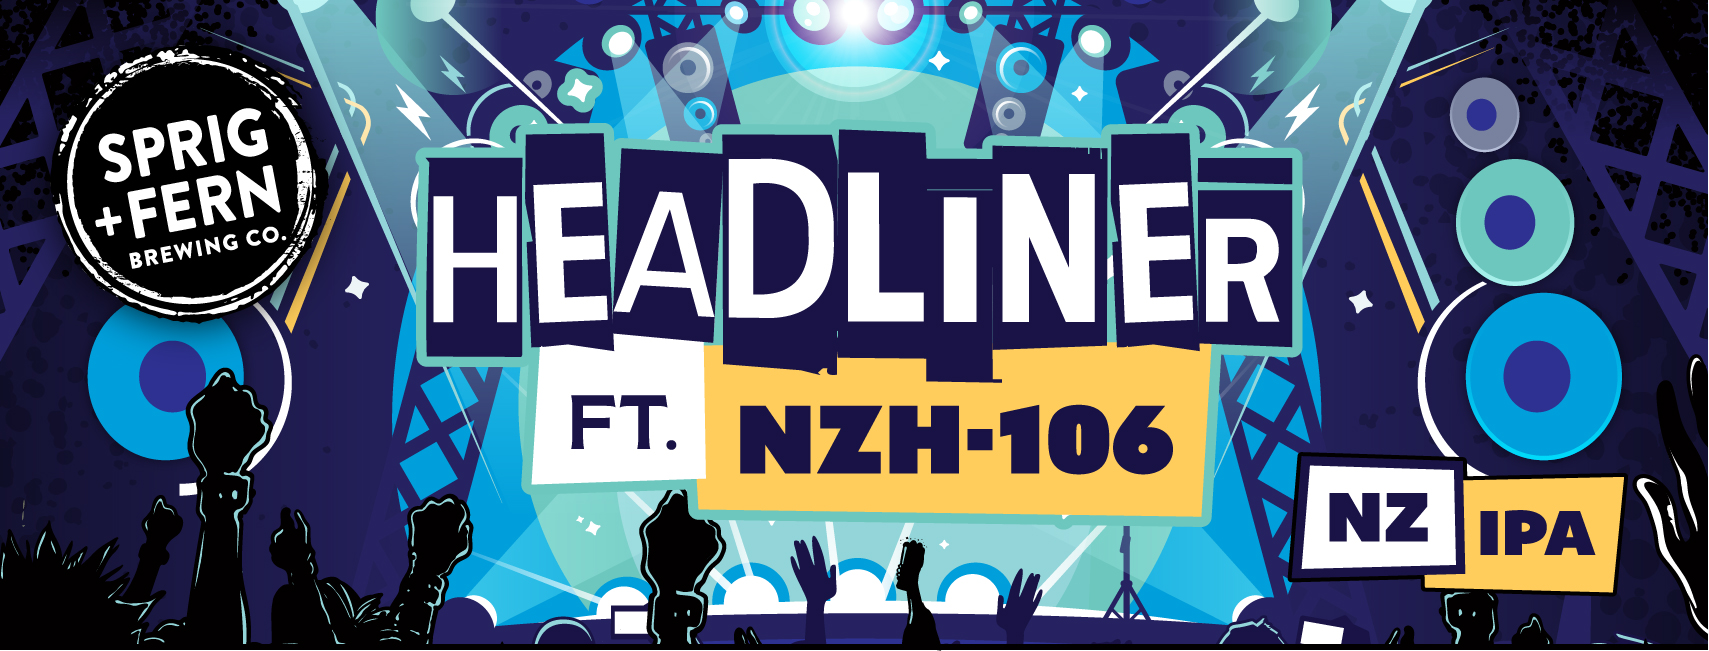 Sprig and Fern's limited release beer 'Headliner feat. NZH-106' NZIPA artwork